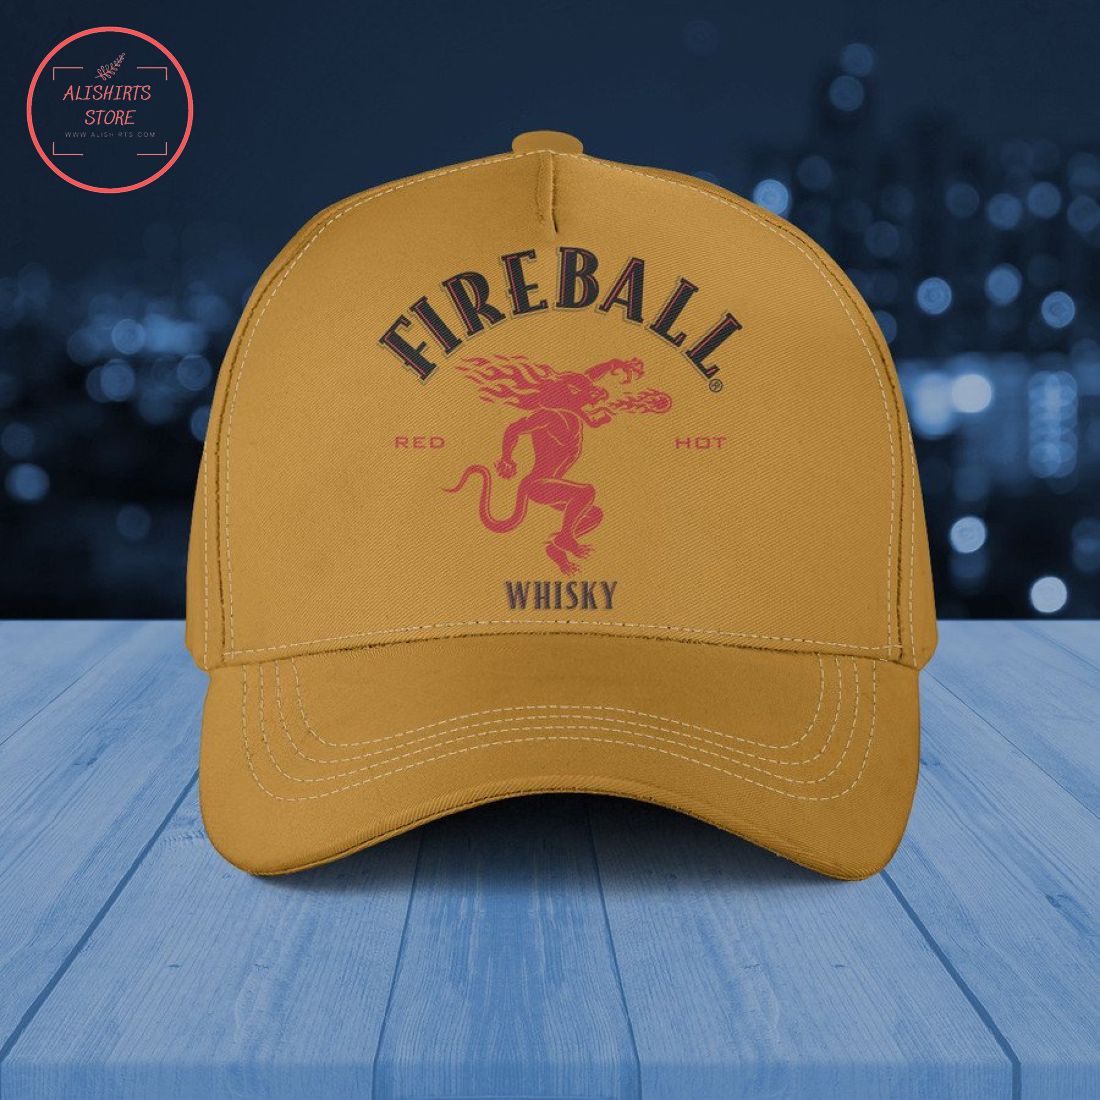 Fire Ball Whisky Classic Hat Cap